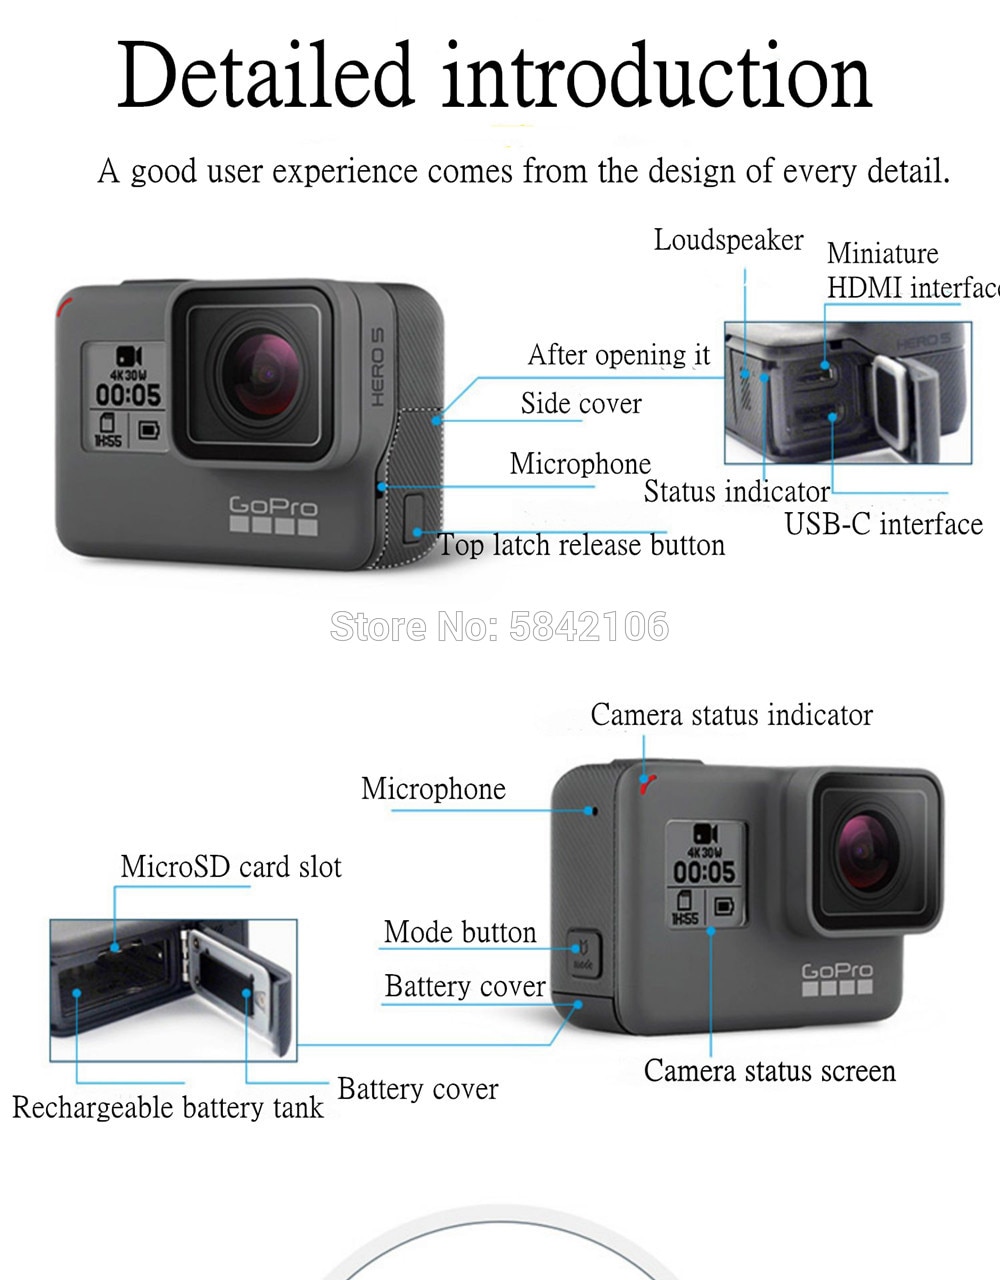 Gopro HERO 5 Black Action Camera Outdoor Sports Camera with 4K Ultra HD Video   gopro 5  good products